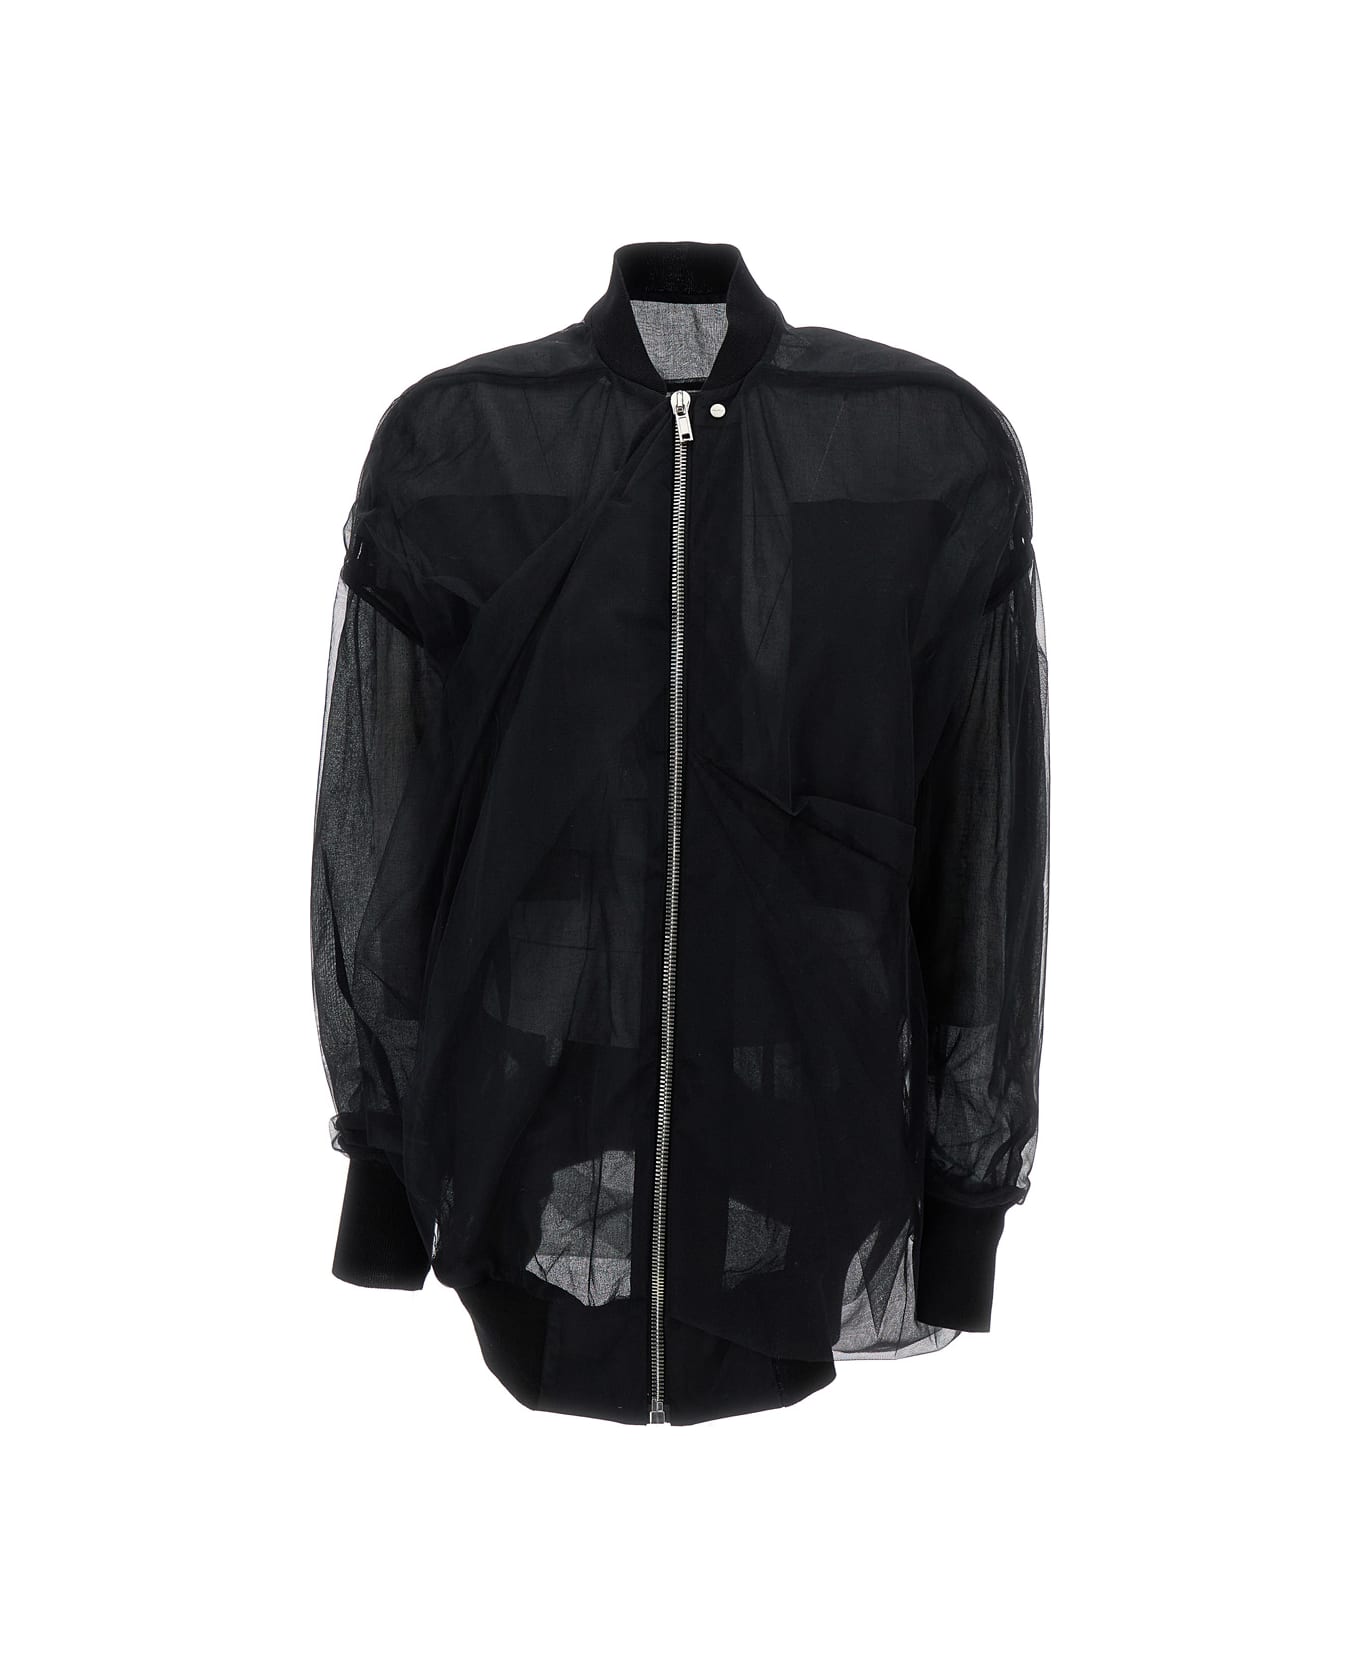 Rick Owens Jacket With Tulle Design In Technical Fabric - Black